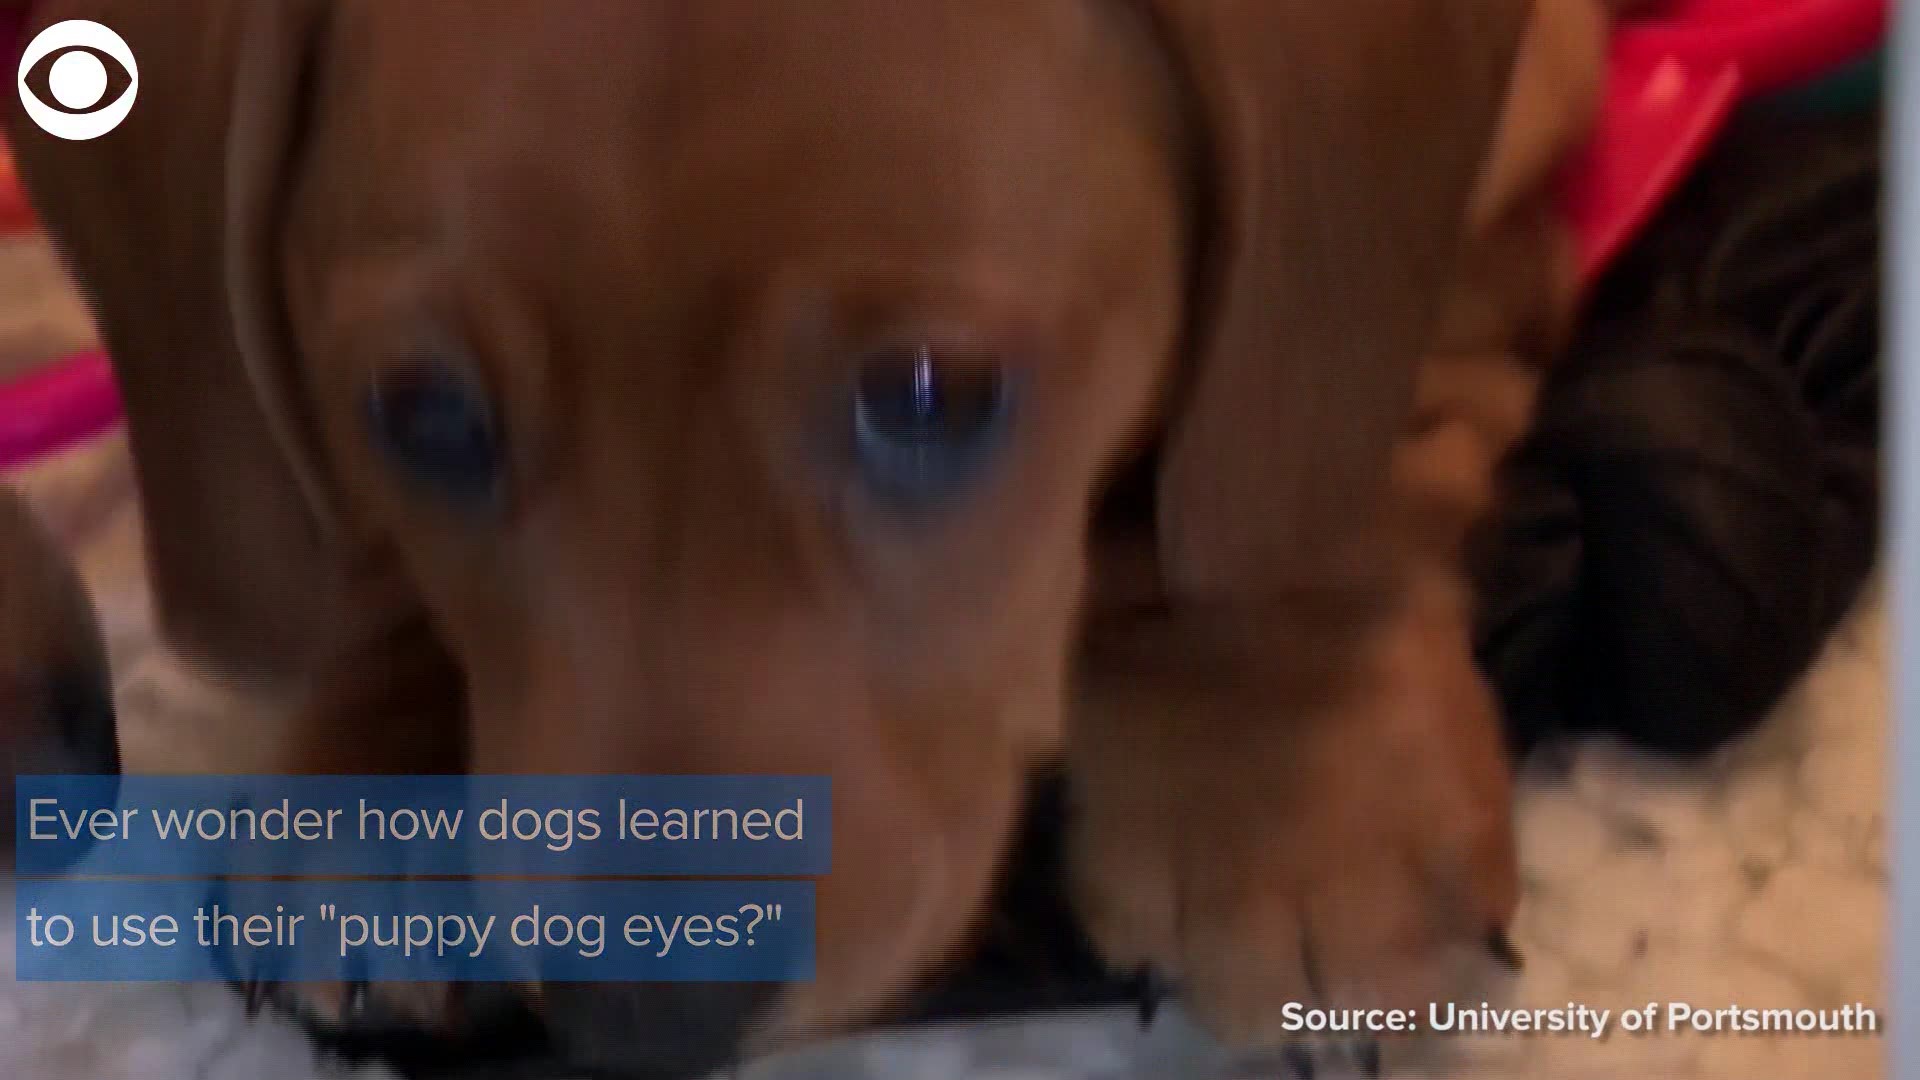 New research finds "puppy dog eyes" are an evolutionary trick that dogs use to get what they want. U.S. and British scientists have teamed up to better understand our relationship with dogs.